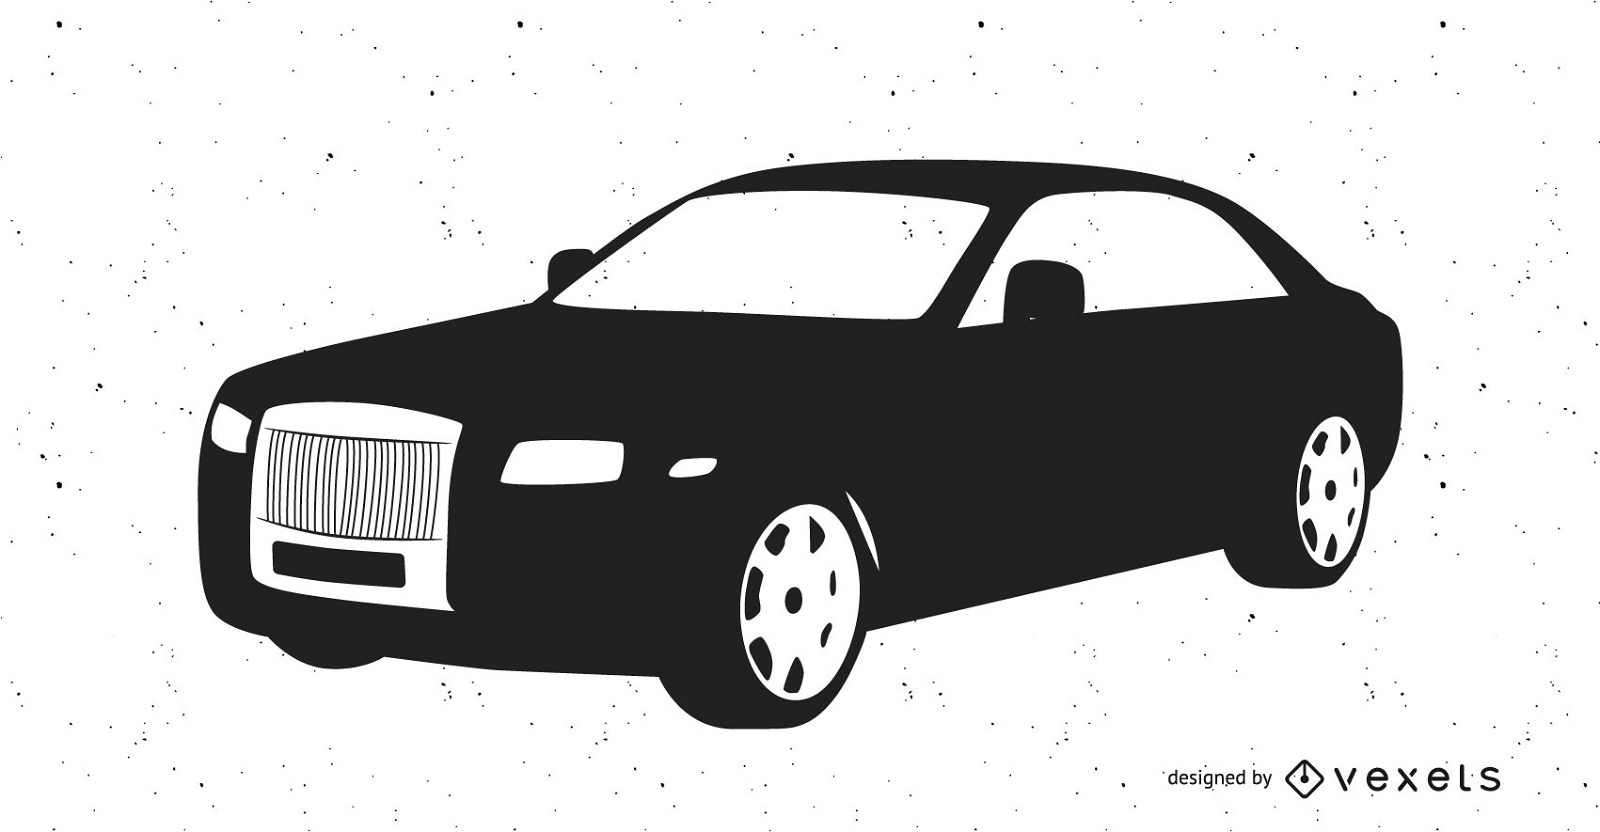 Rolls Royce logo Vectors graphic art designs in editable ai eps svg cdr  format free and easy download unlimit id30496